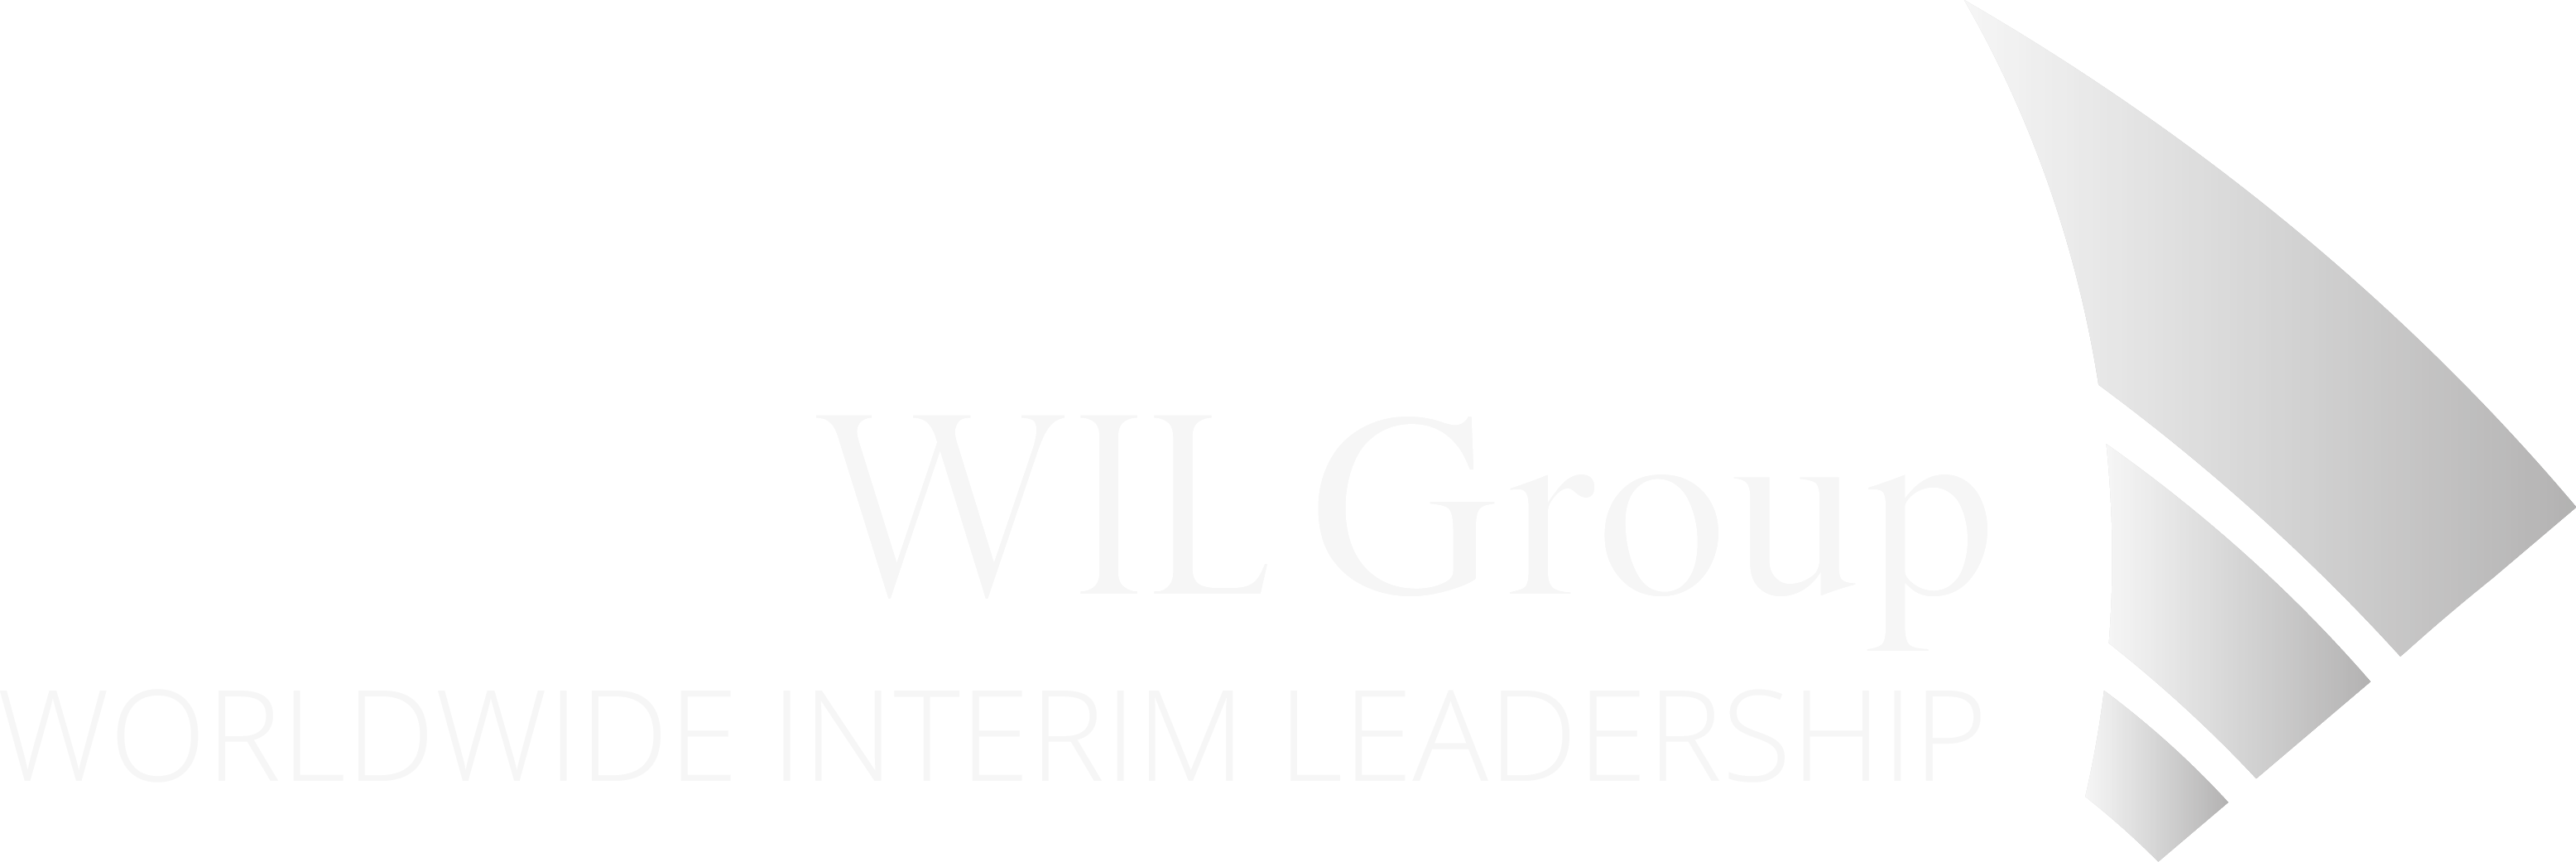 Will Group logo